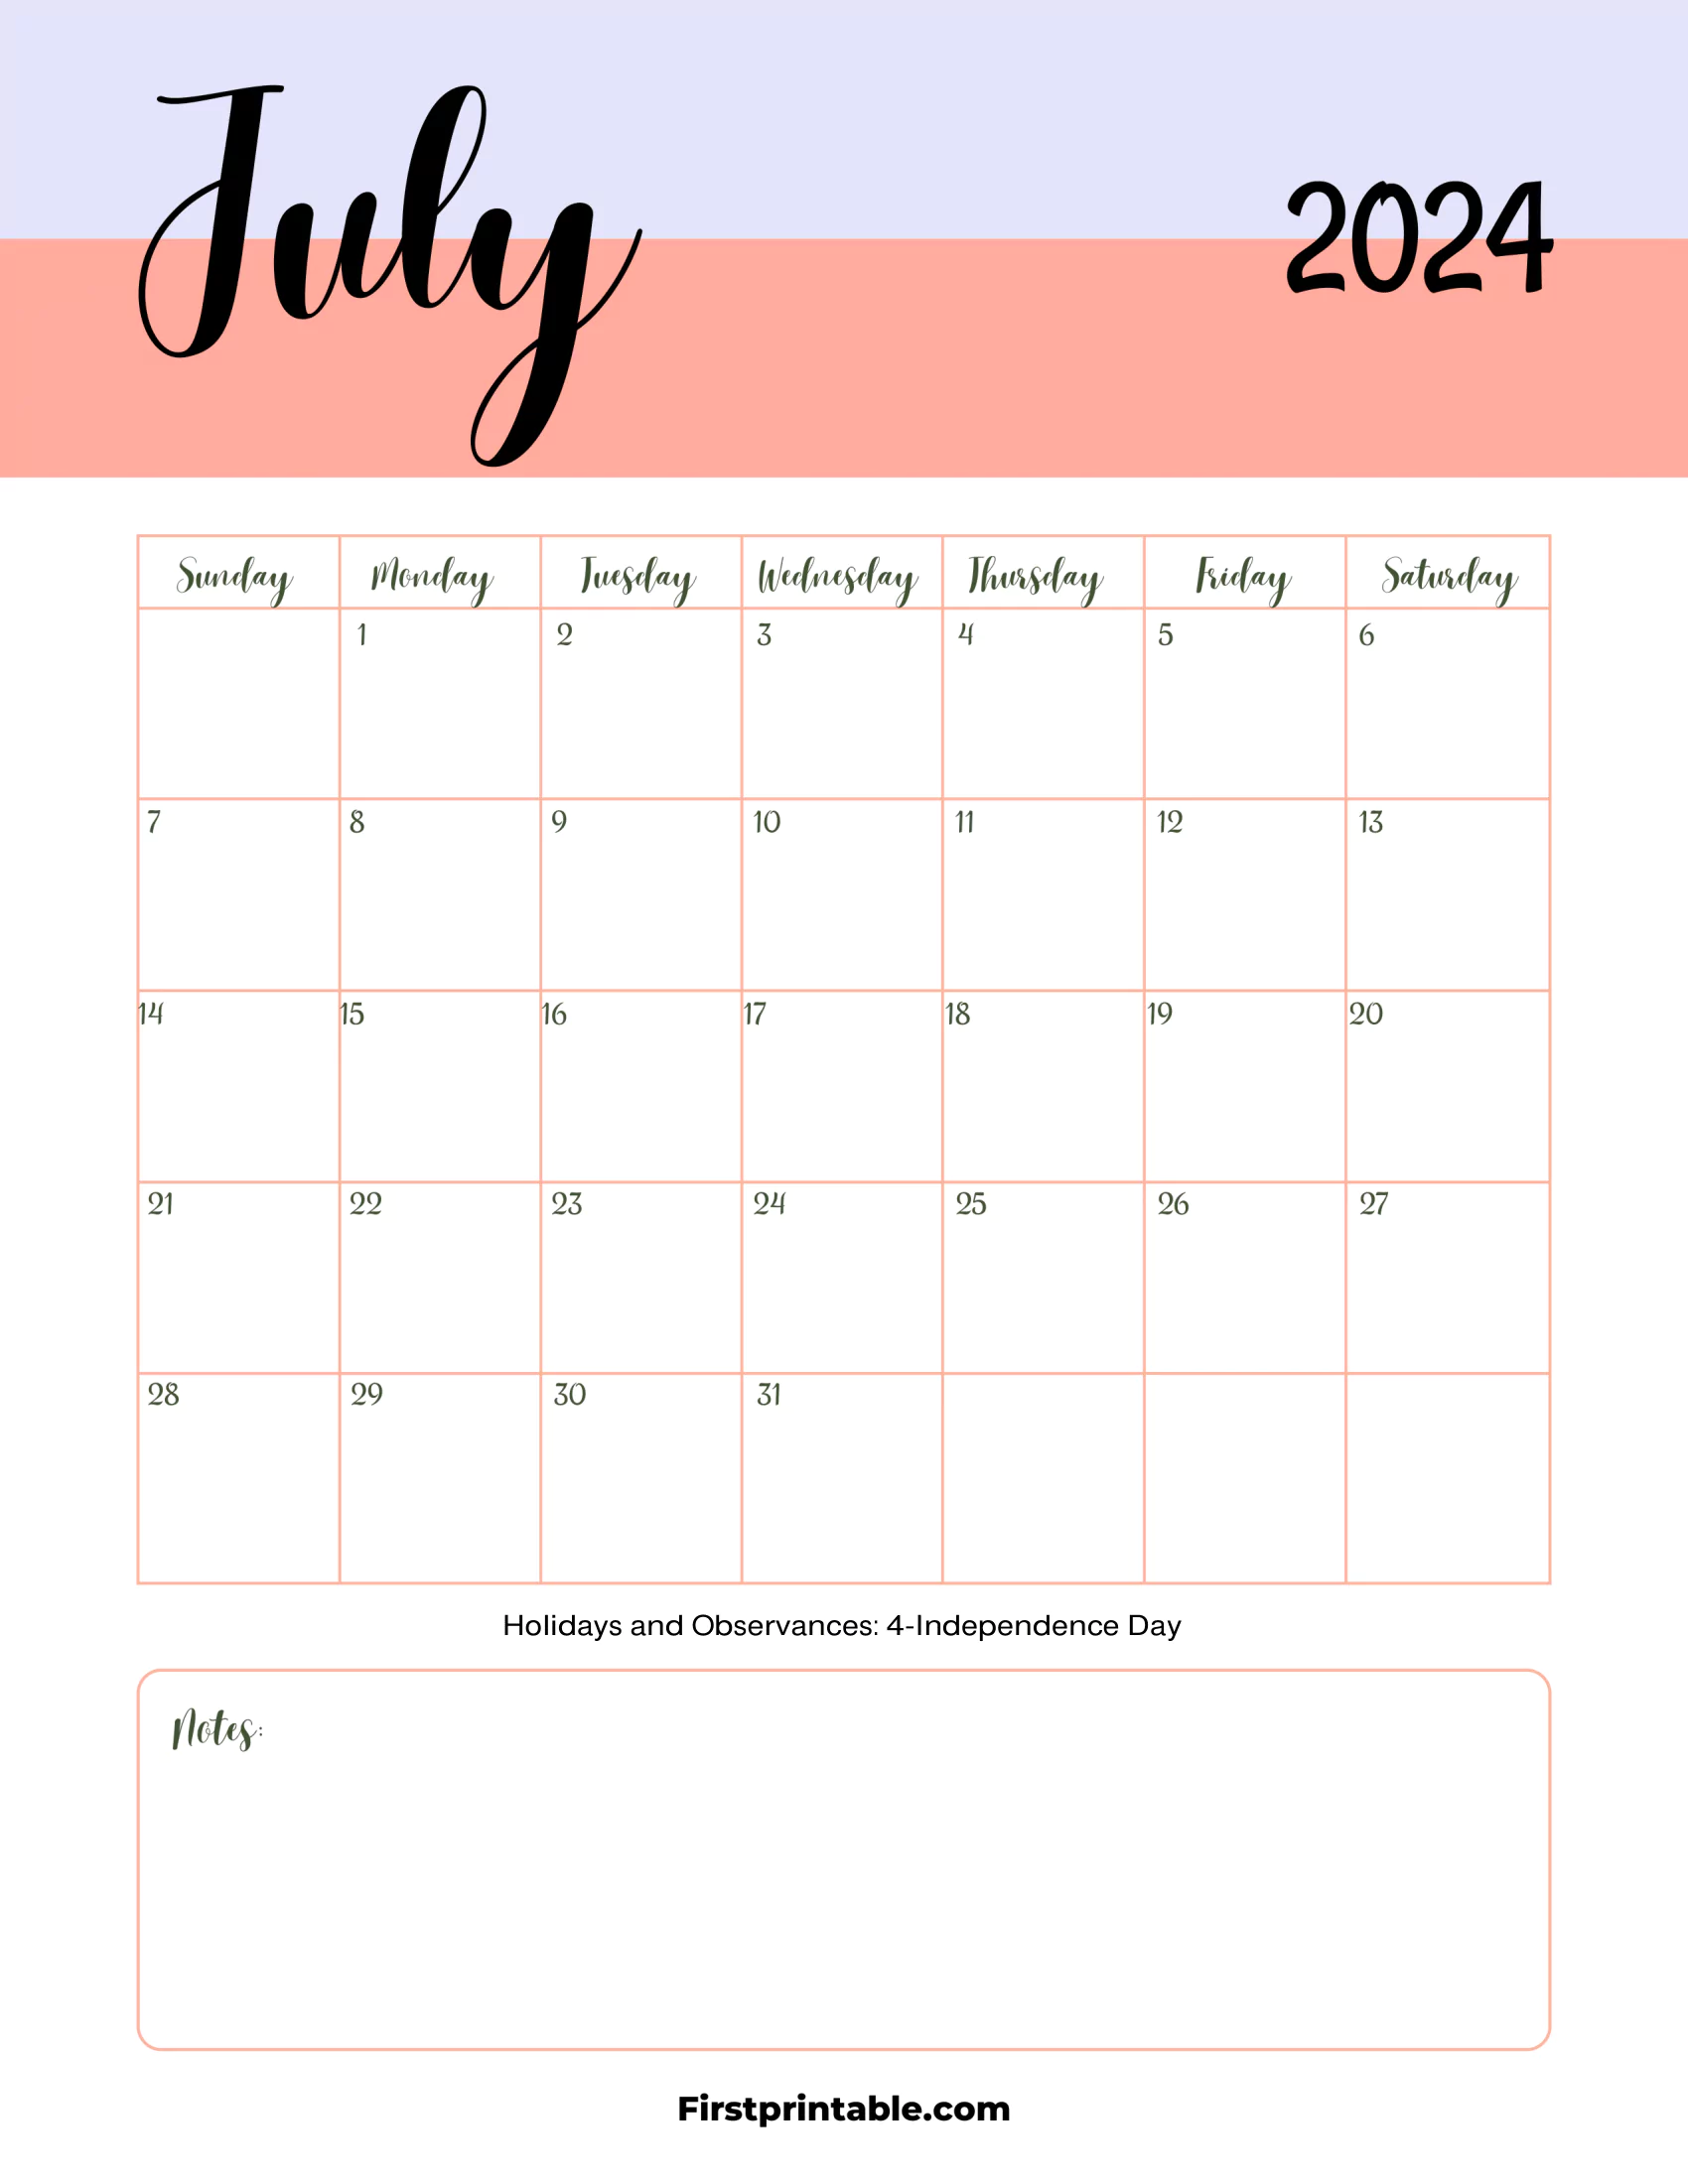 July Calendar 2024 Printable & Fillable with notes (With Holidays)